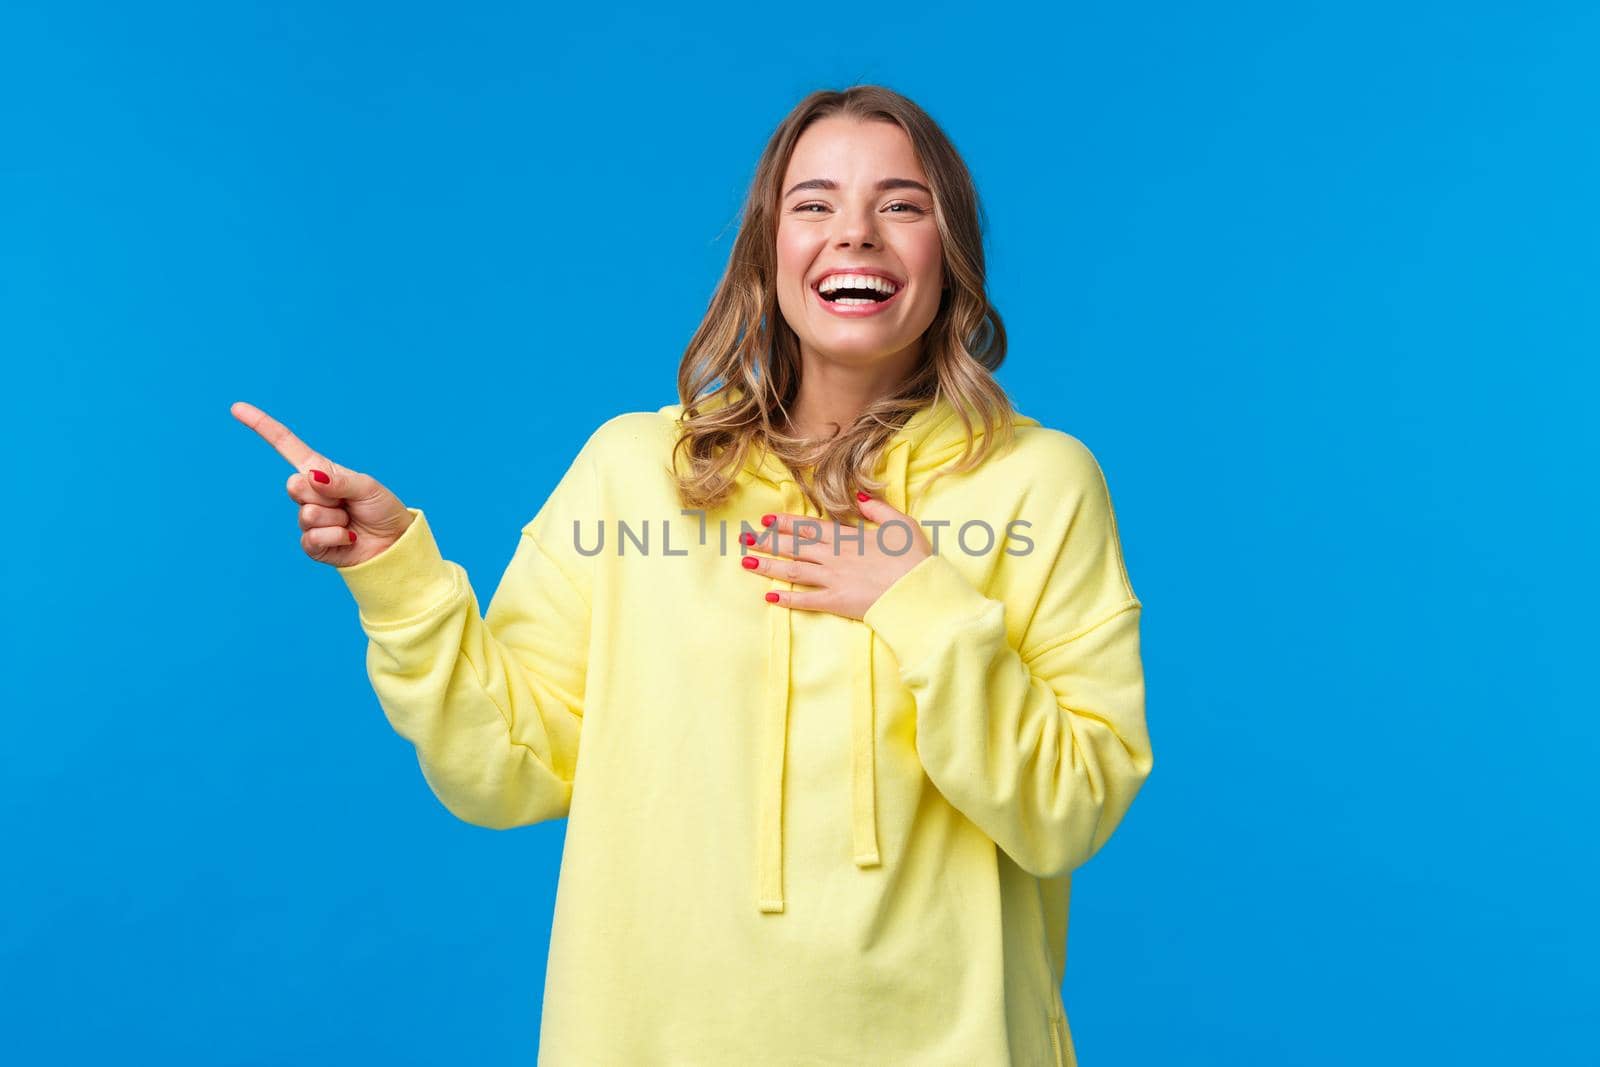 Happy and amused good-looking blond female in yellow hoodie, laughing out loud over something hilarious on upper left corner of blue background, smiling and looking entertained camera.